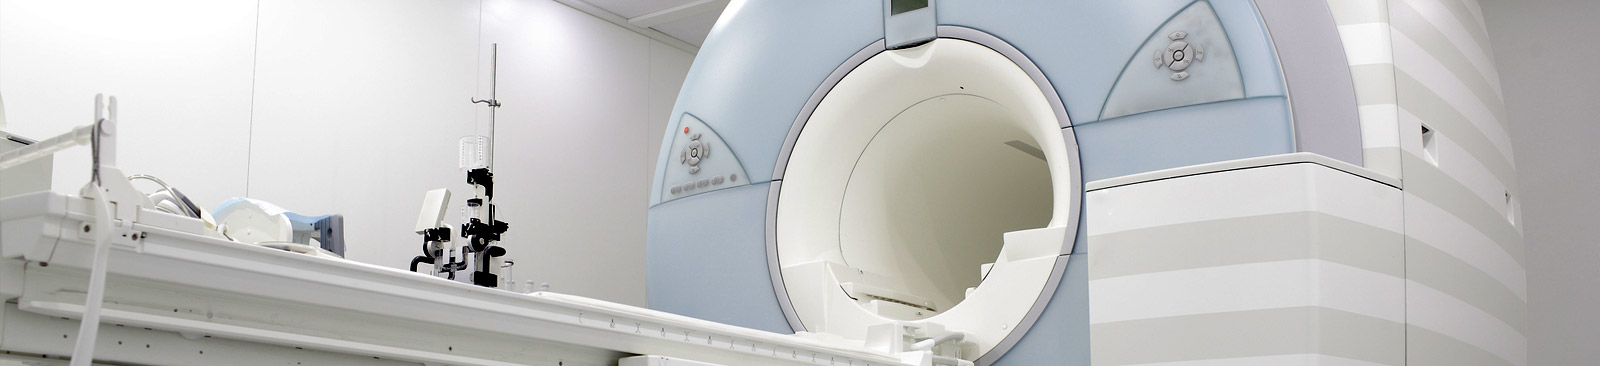 PSMA PET scans may be flawed